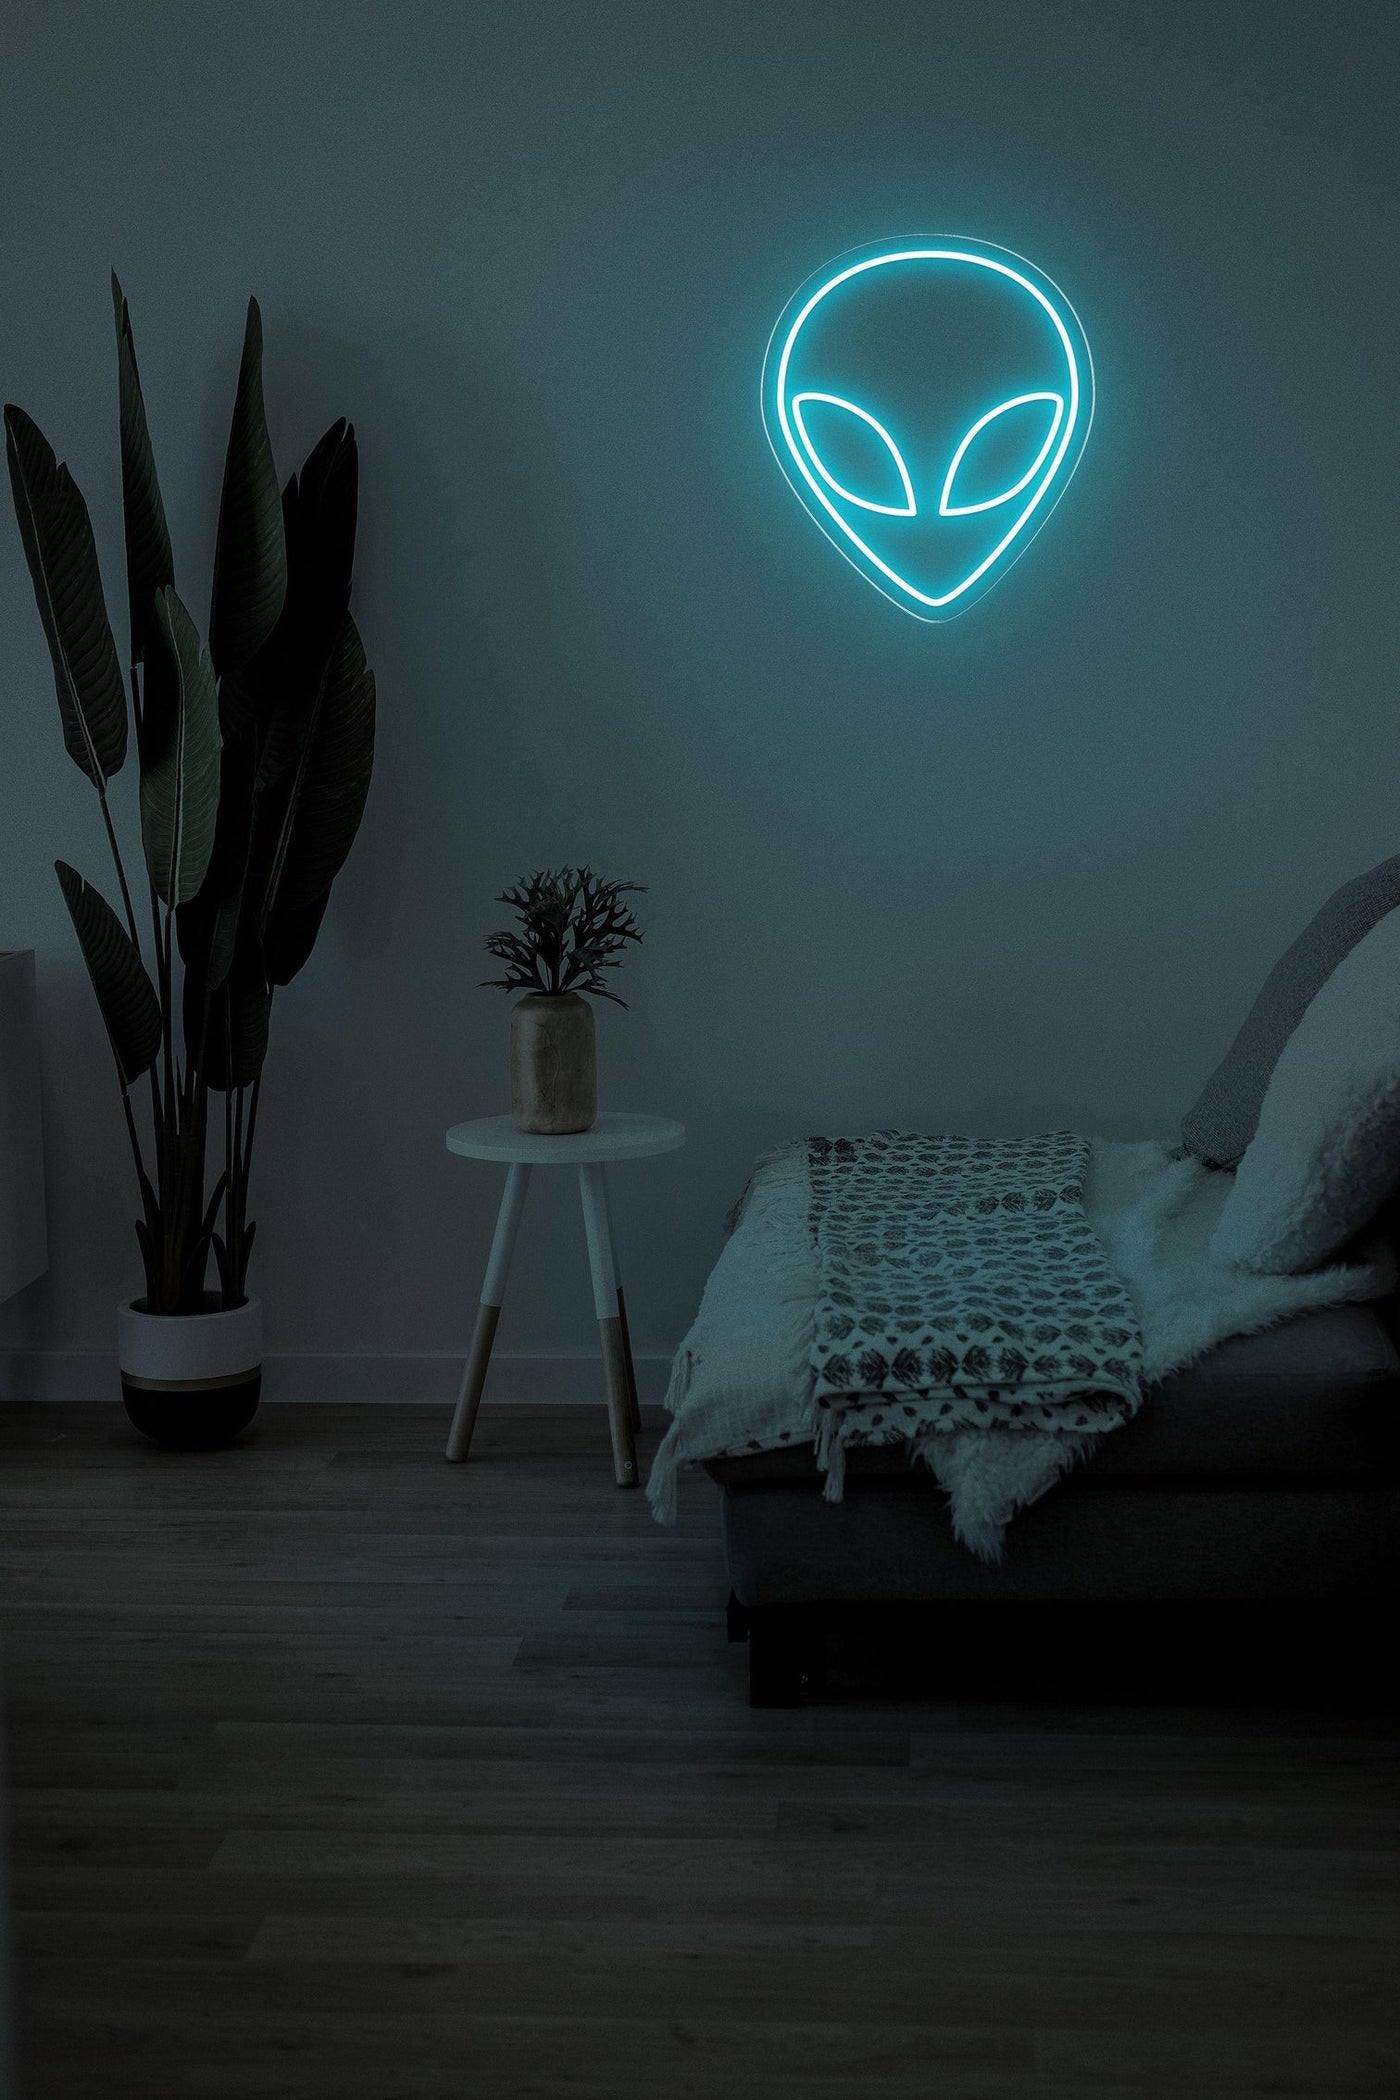 ET LED neon sign - 20inch x 23inchTurquoise